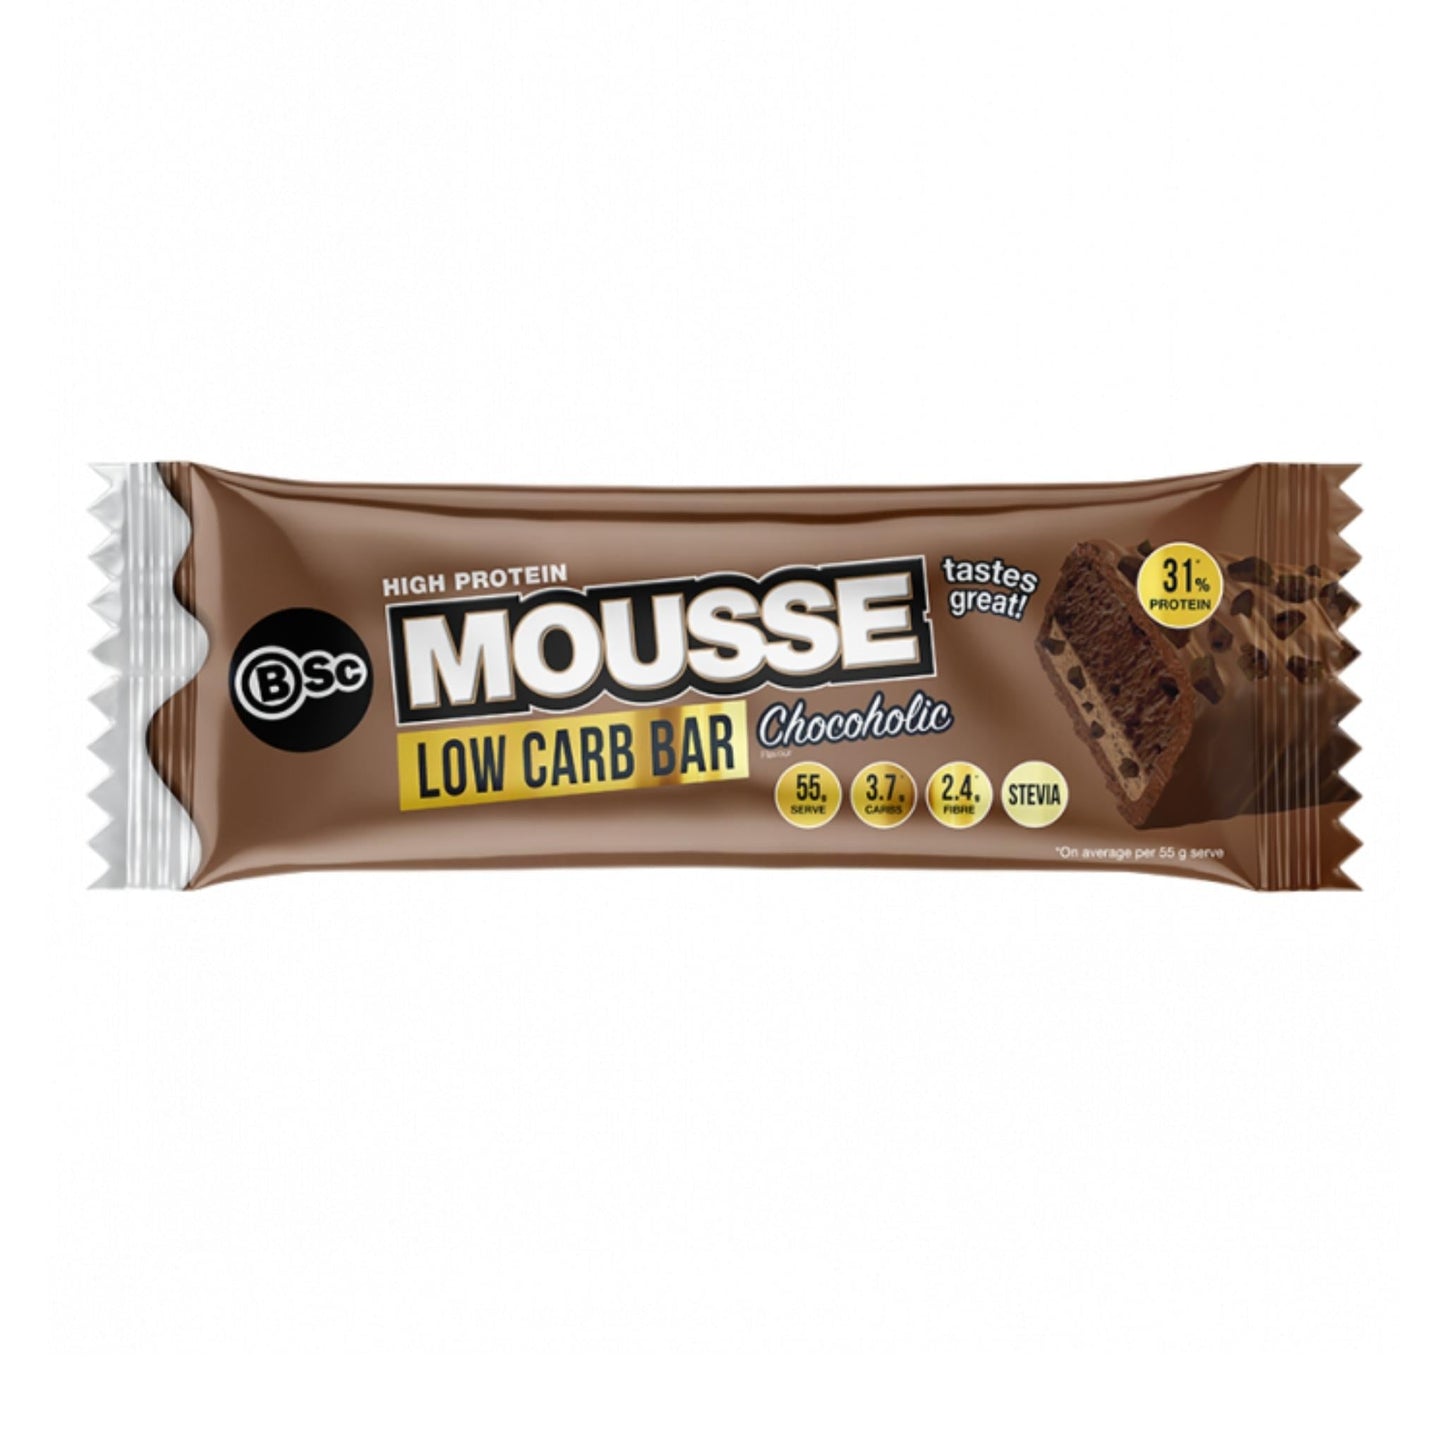 Body Science (BSc) - High Protein Low Carb Mousse Bar - Cafe - 55g - The Cave Gym